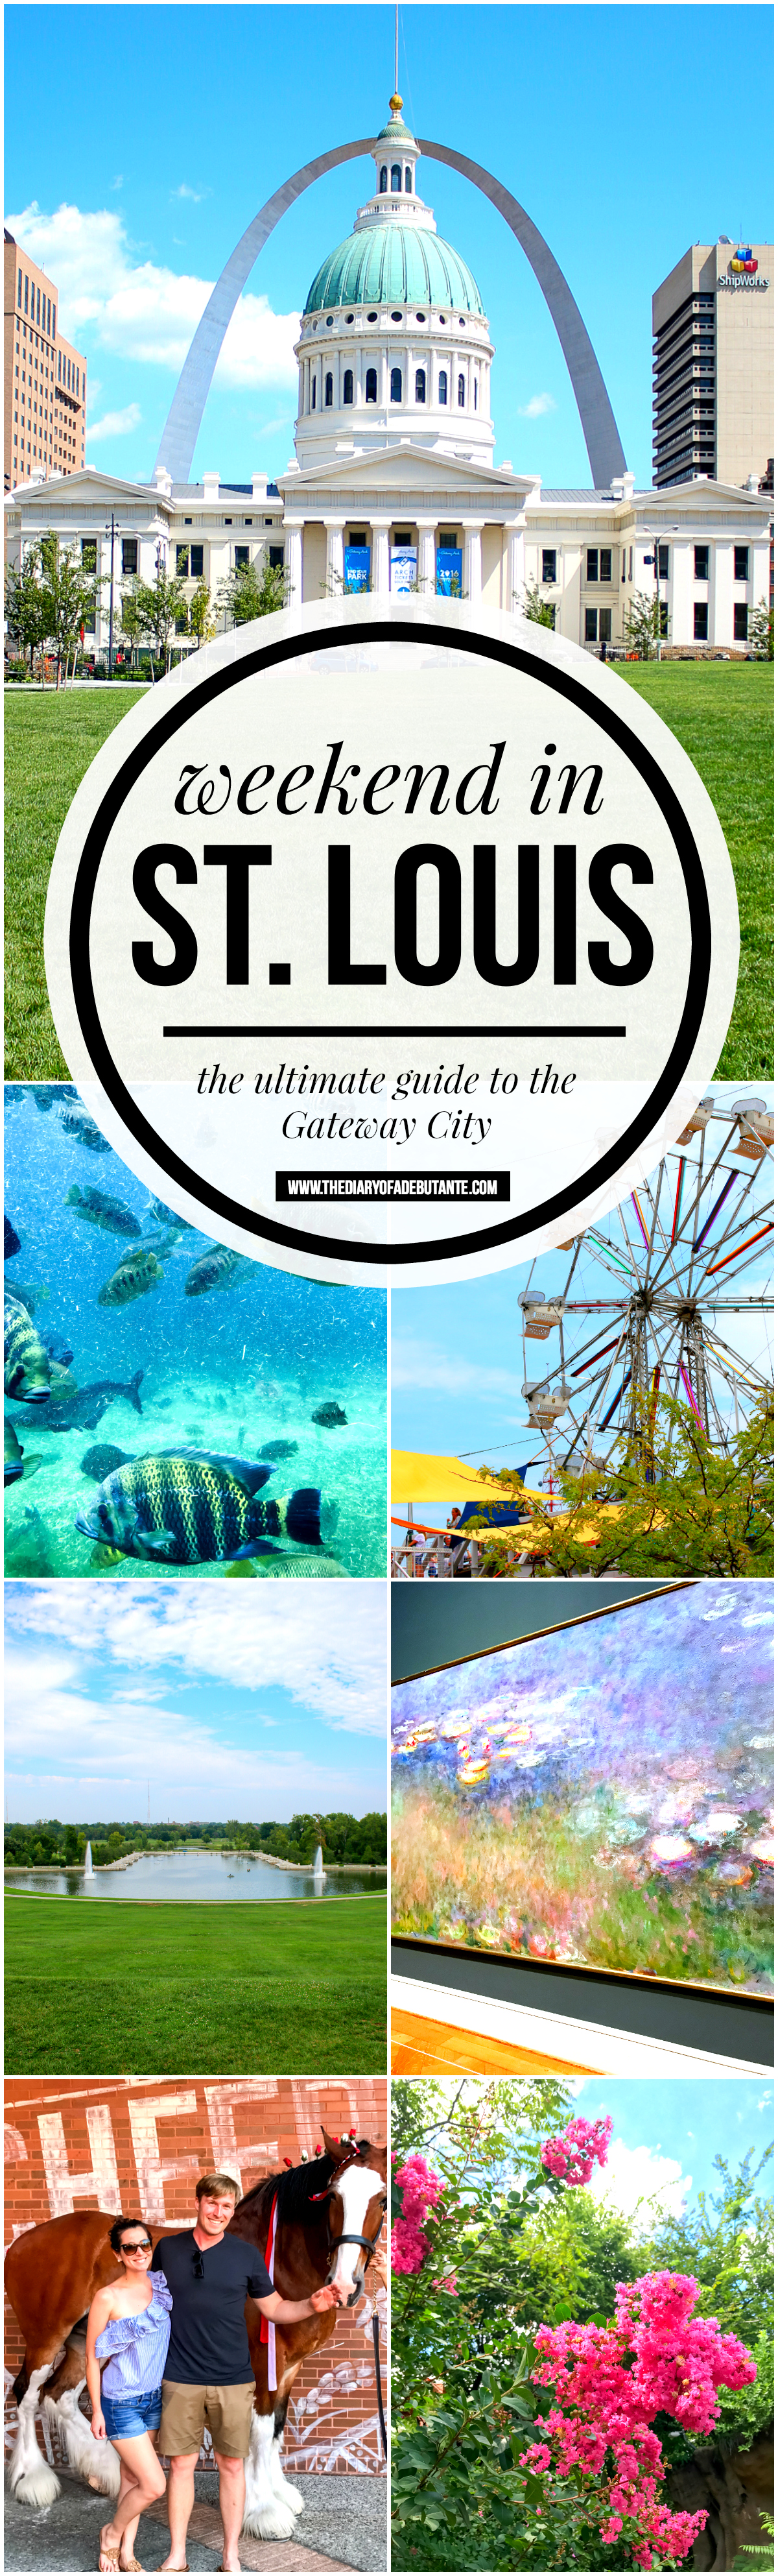 things to do in st louis this weekend